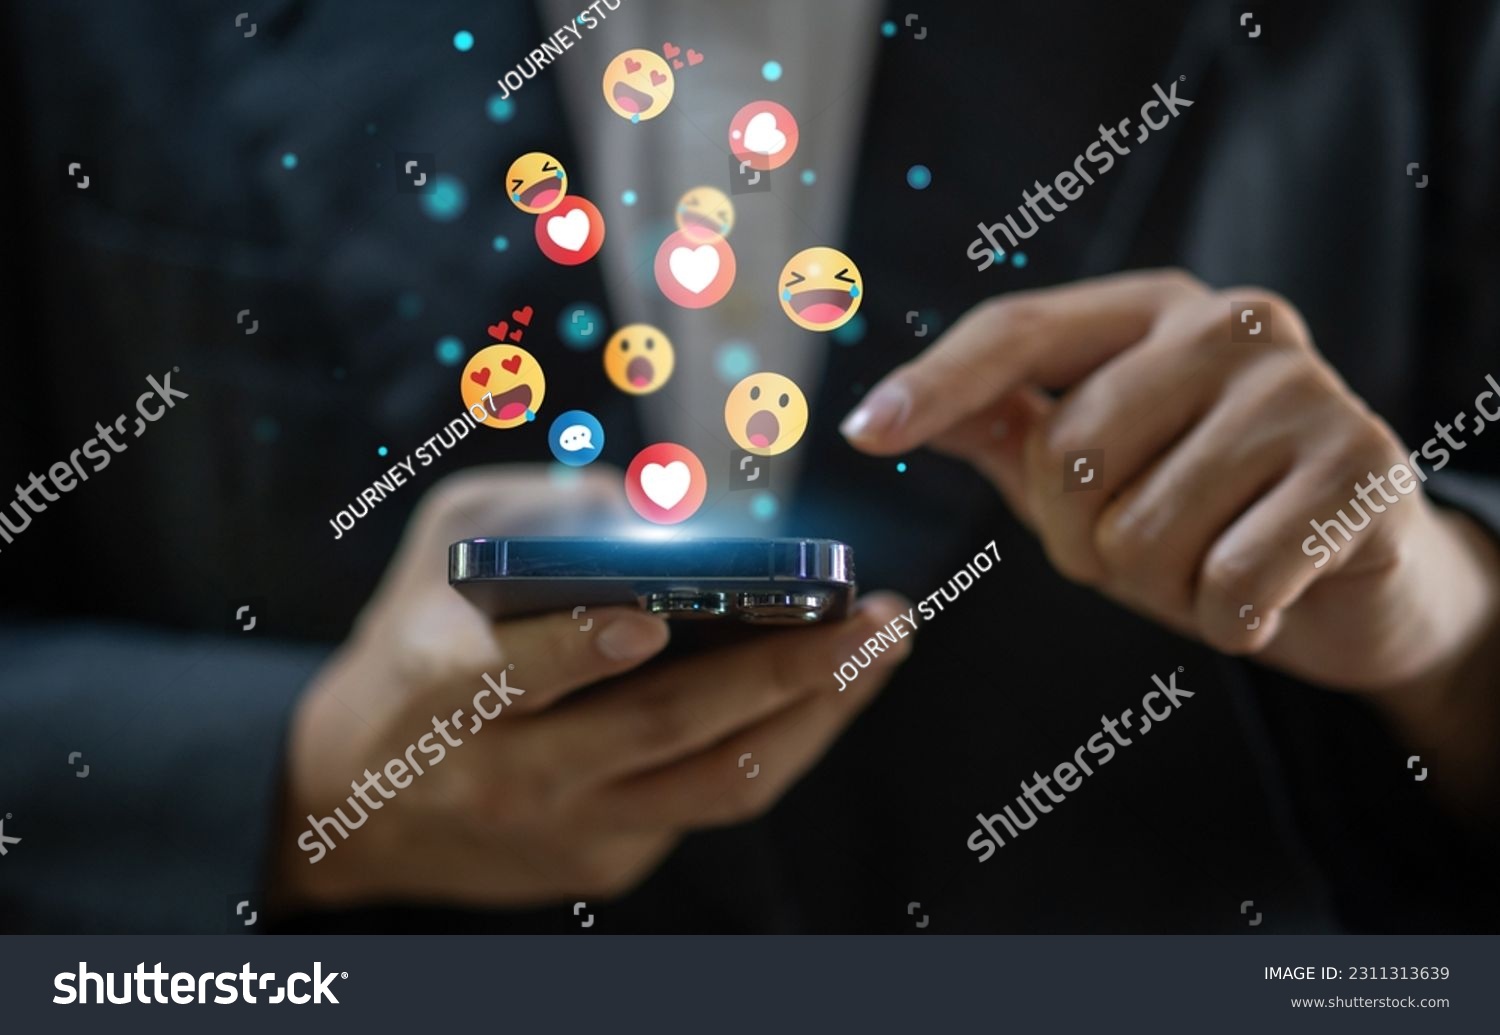 Concept of social media communication and digital online, people use smartphone playing with icon online social media, online marketing, technology, chat, post, like, follow at phone screen #2311313639